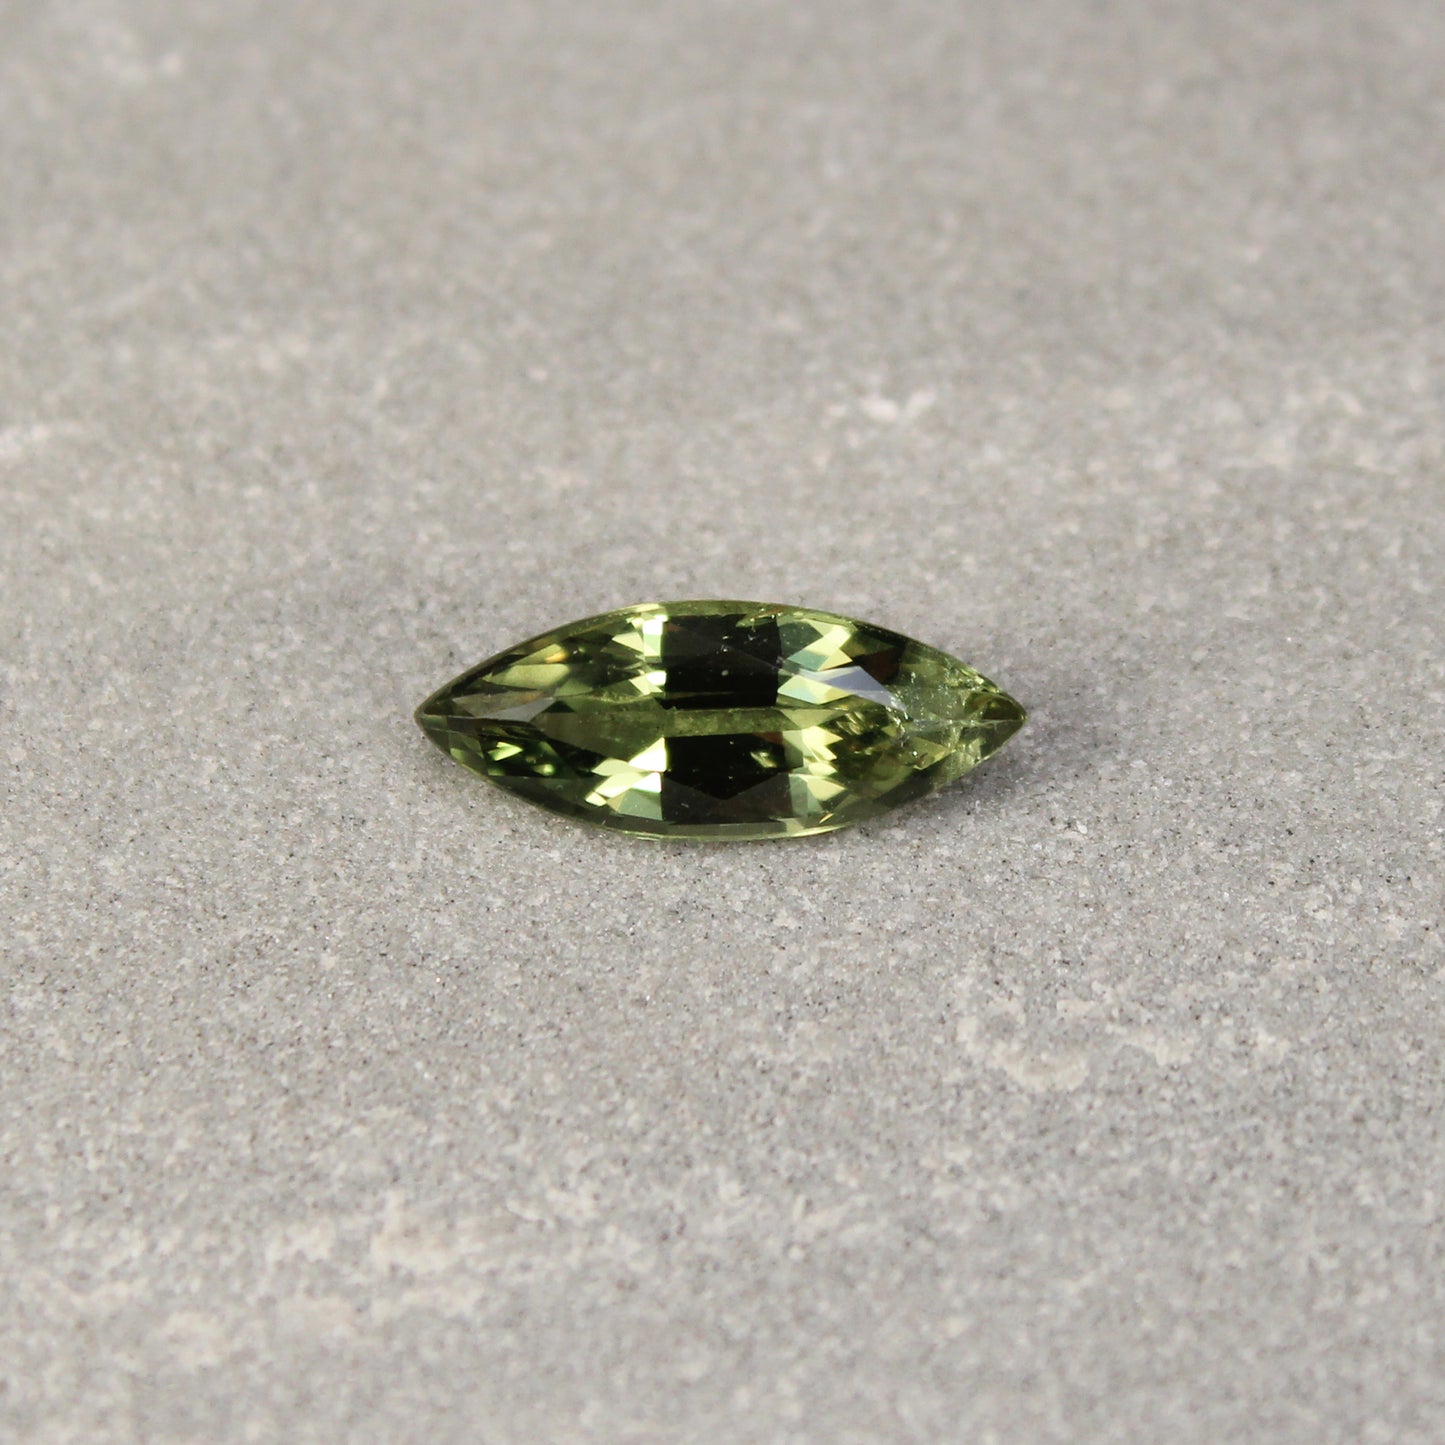 2.28ct Yellowish Green, Marquise Sapphire, Heated, East Africa - 13.90 x 5.48 x 3.82mm